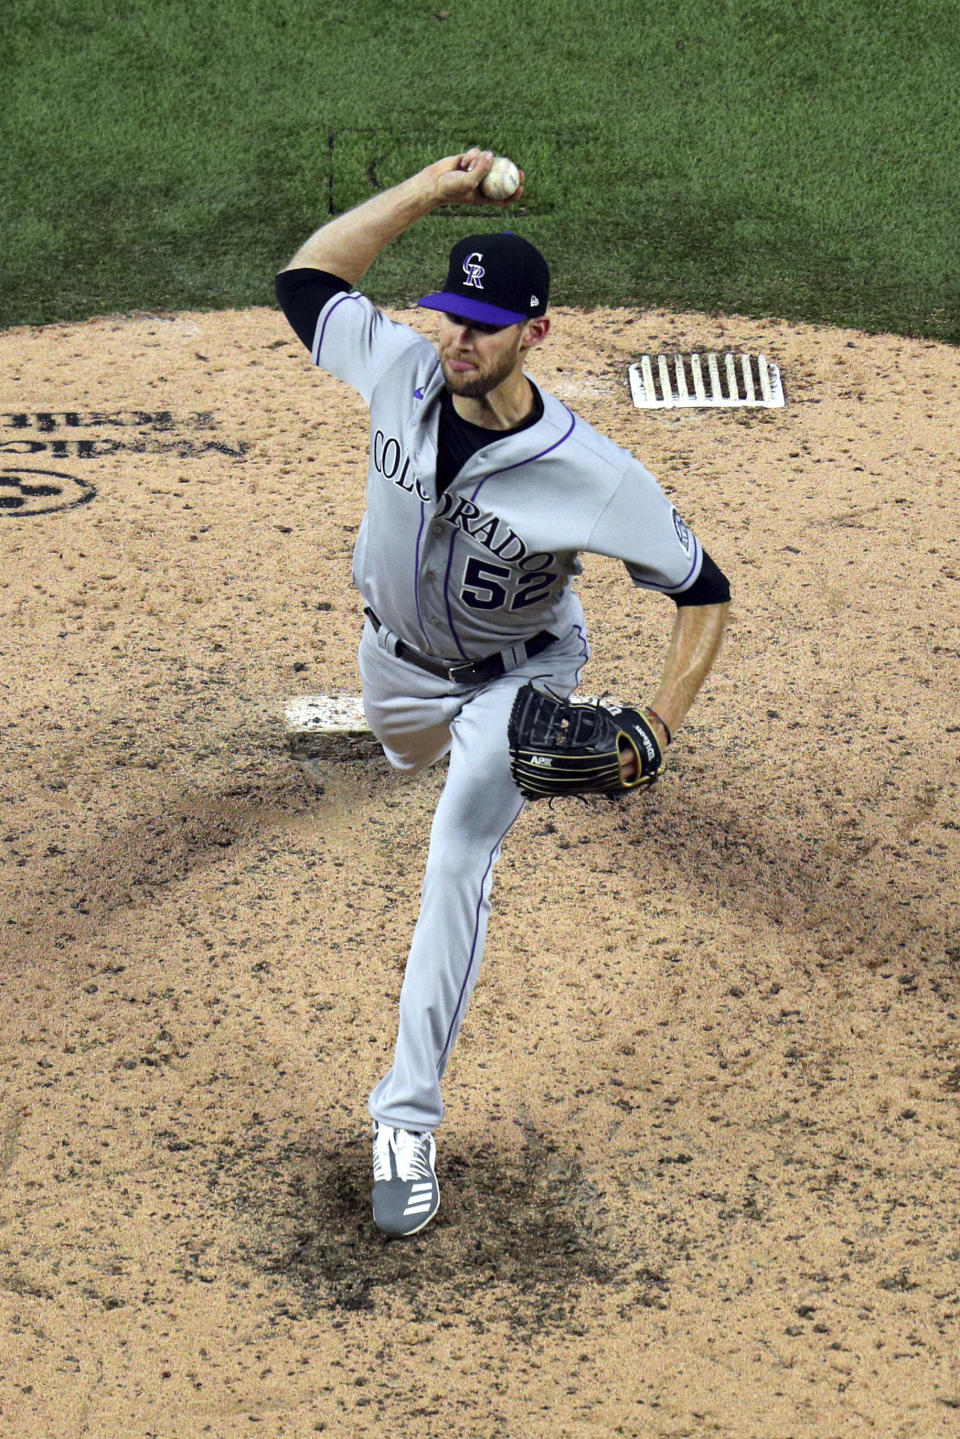 Colorado Rockies pitcher Daniel Bard throws in the fifth inning against the Texas Rangers in a baseball game Saturday, July 25, 2020, in Arlington, Texas. (AP Photo/Richard W. Rodriguez)